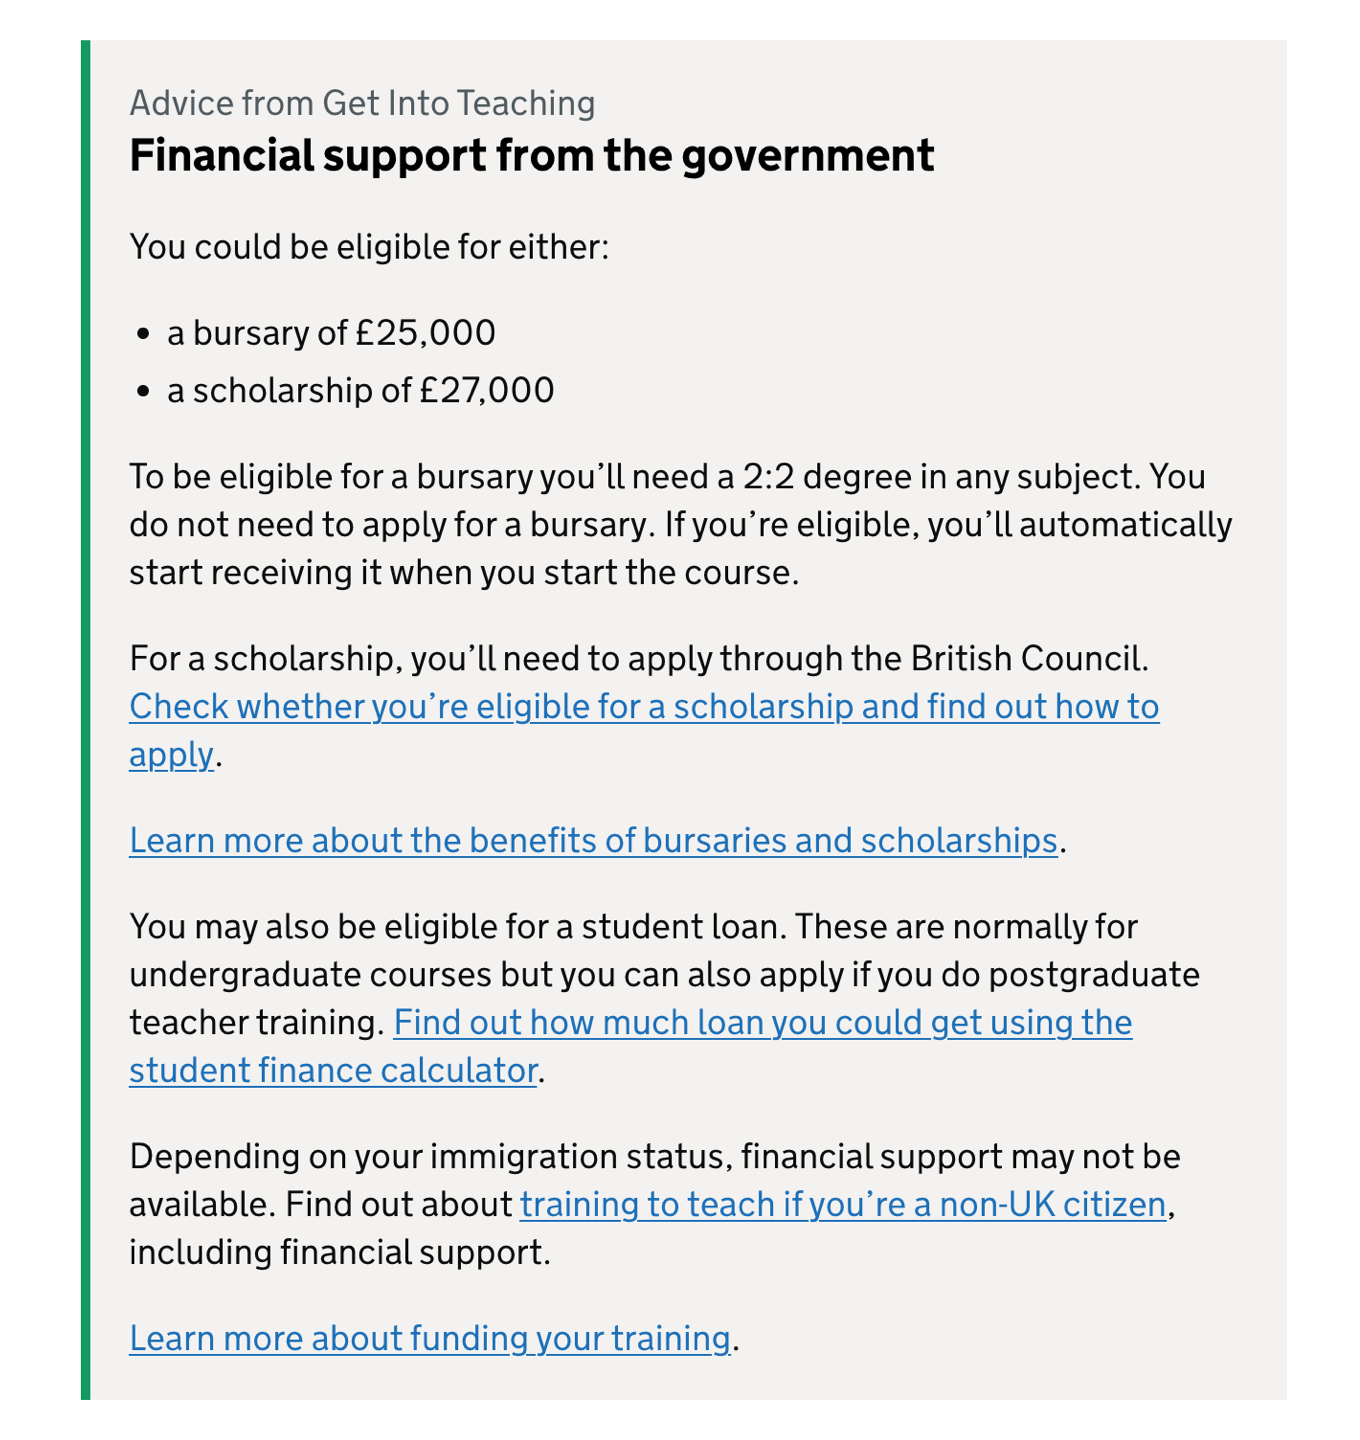 Financial support from the government